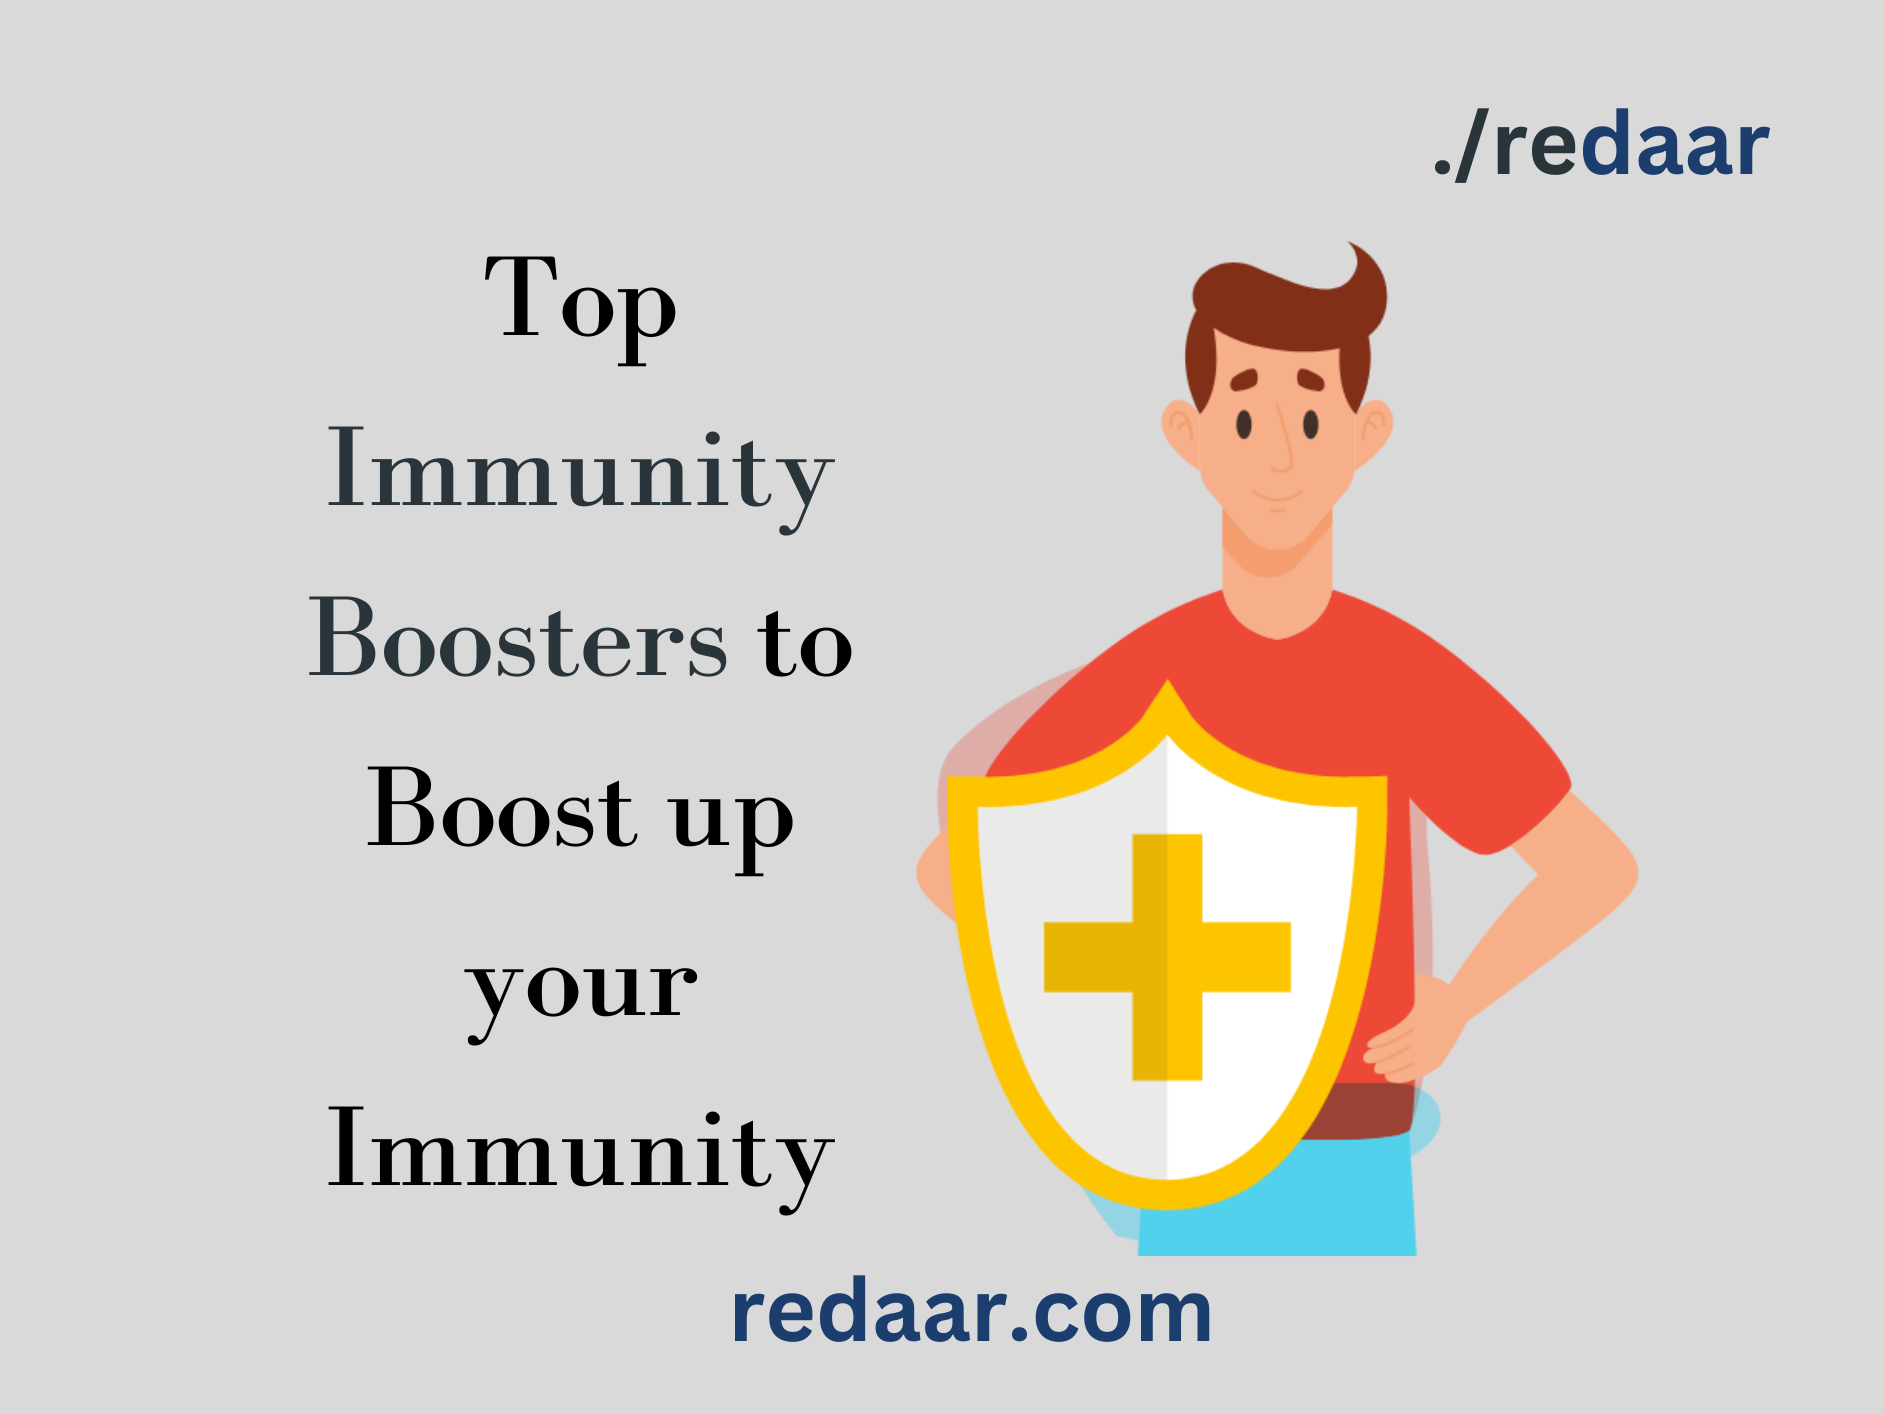 Immunity Boosters to Boost up your Immunity